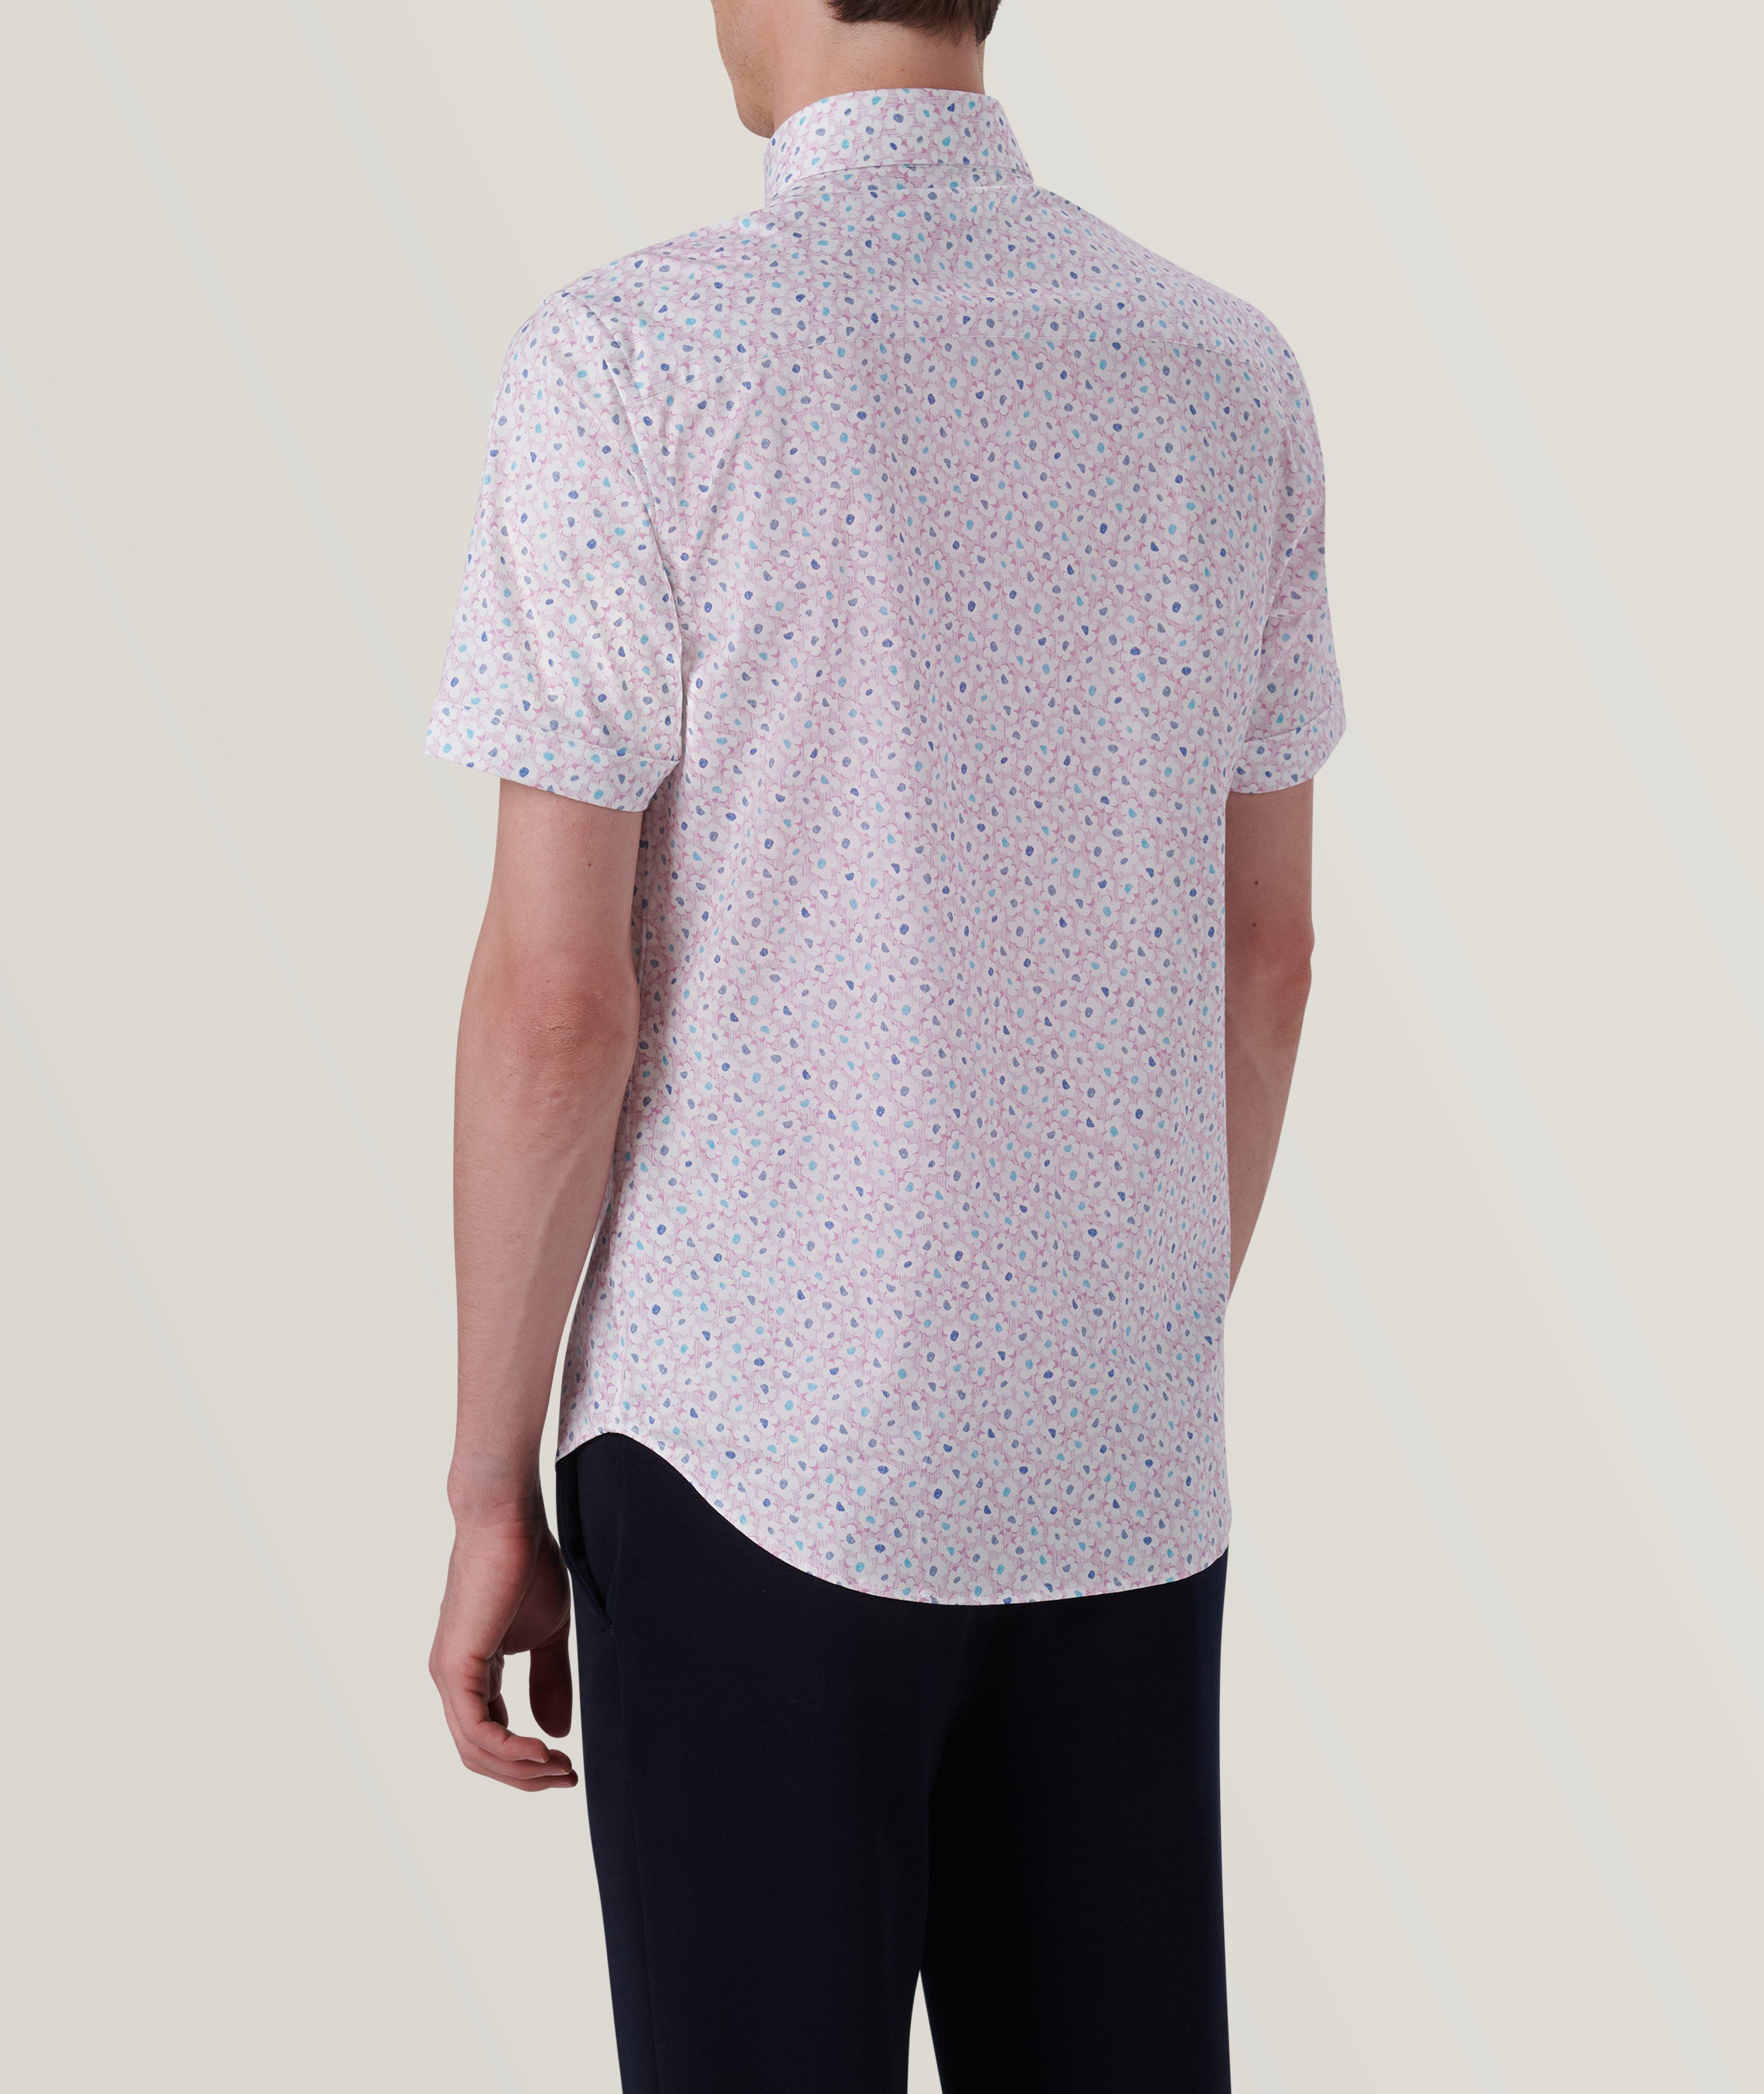 Miles Floral OoohCotton Sport Shirt image 4